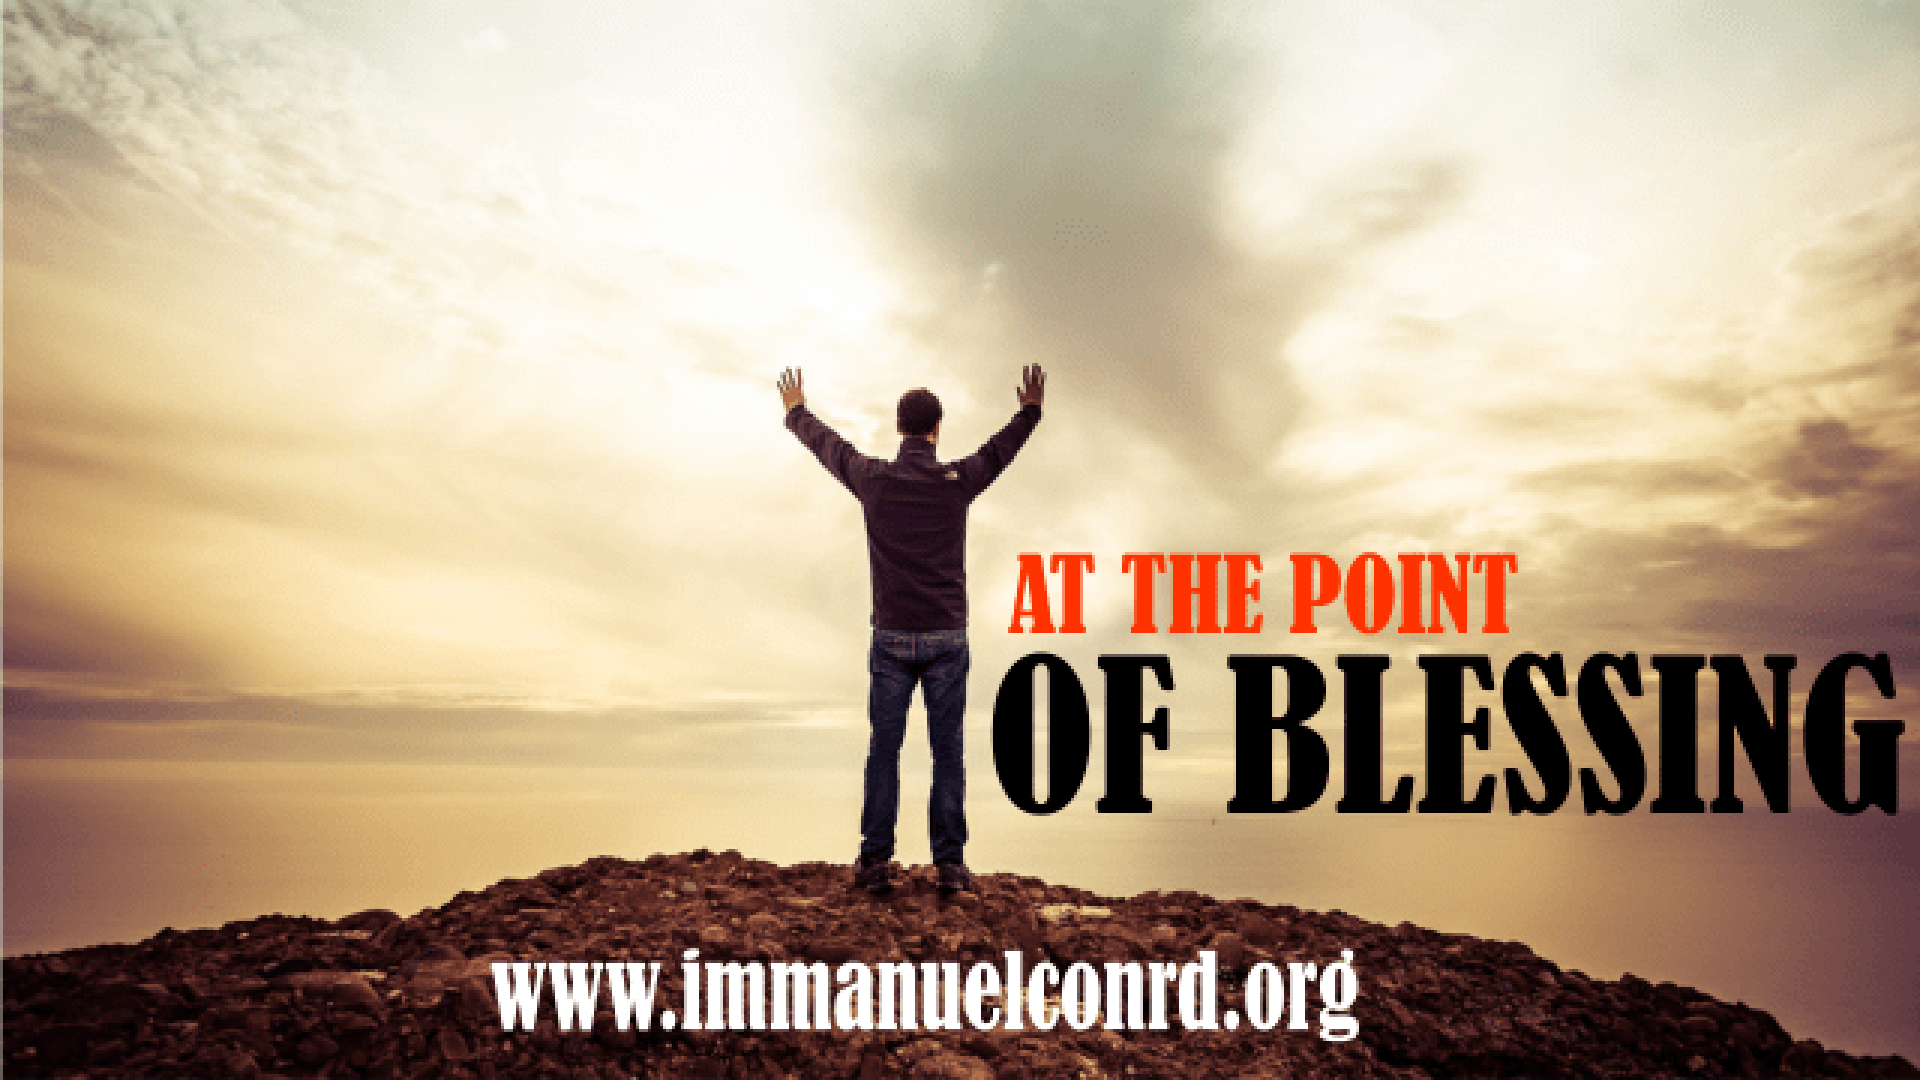 AT THE POINT OF BLESSING